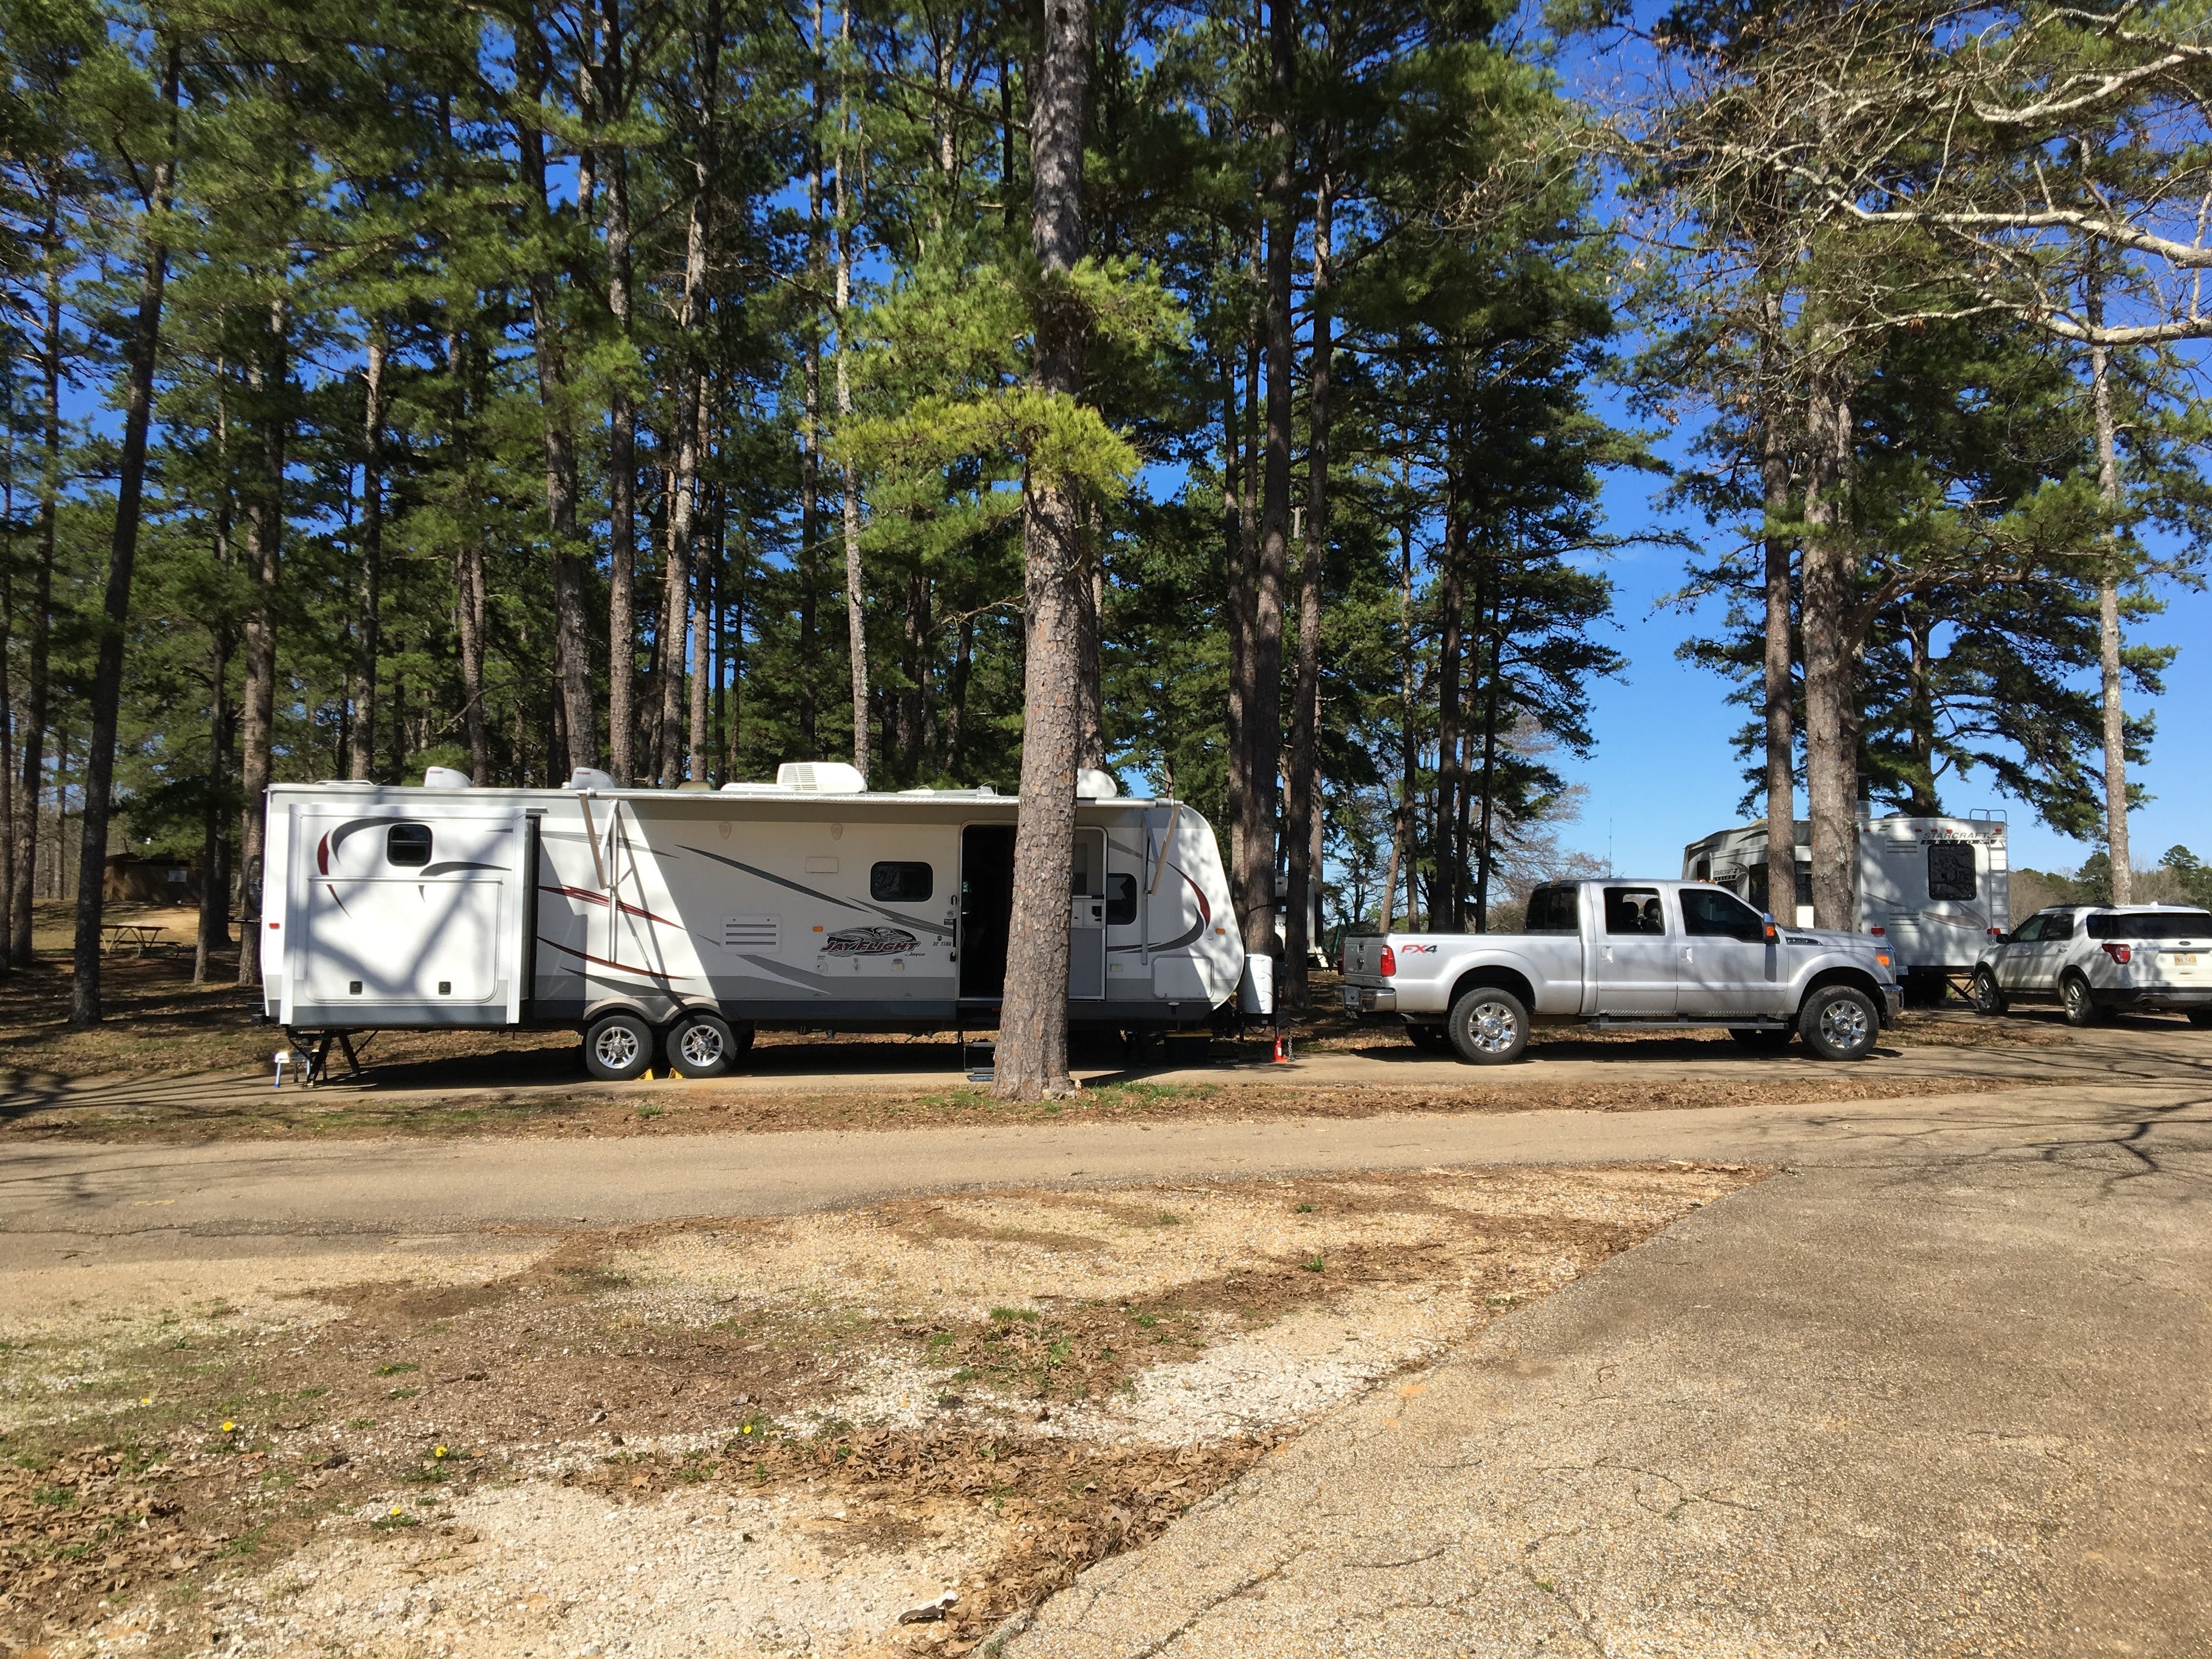 our Jayco 32TSBH setup in a nice pull-through site.